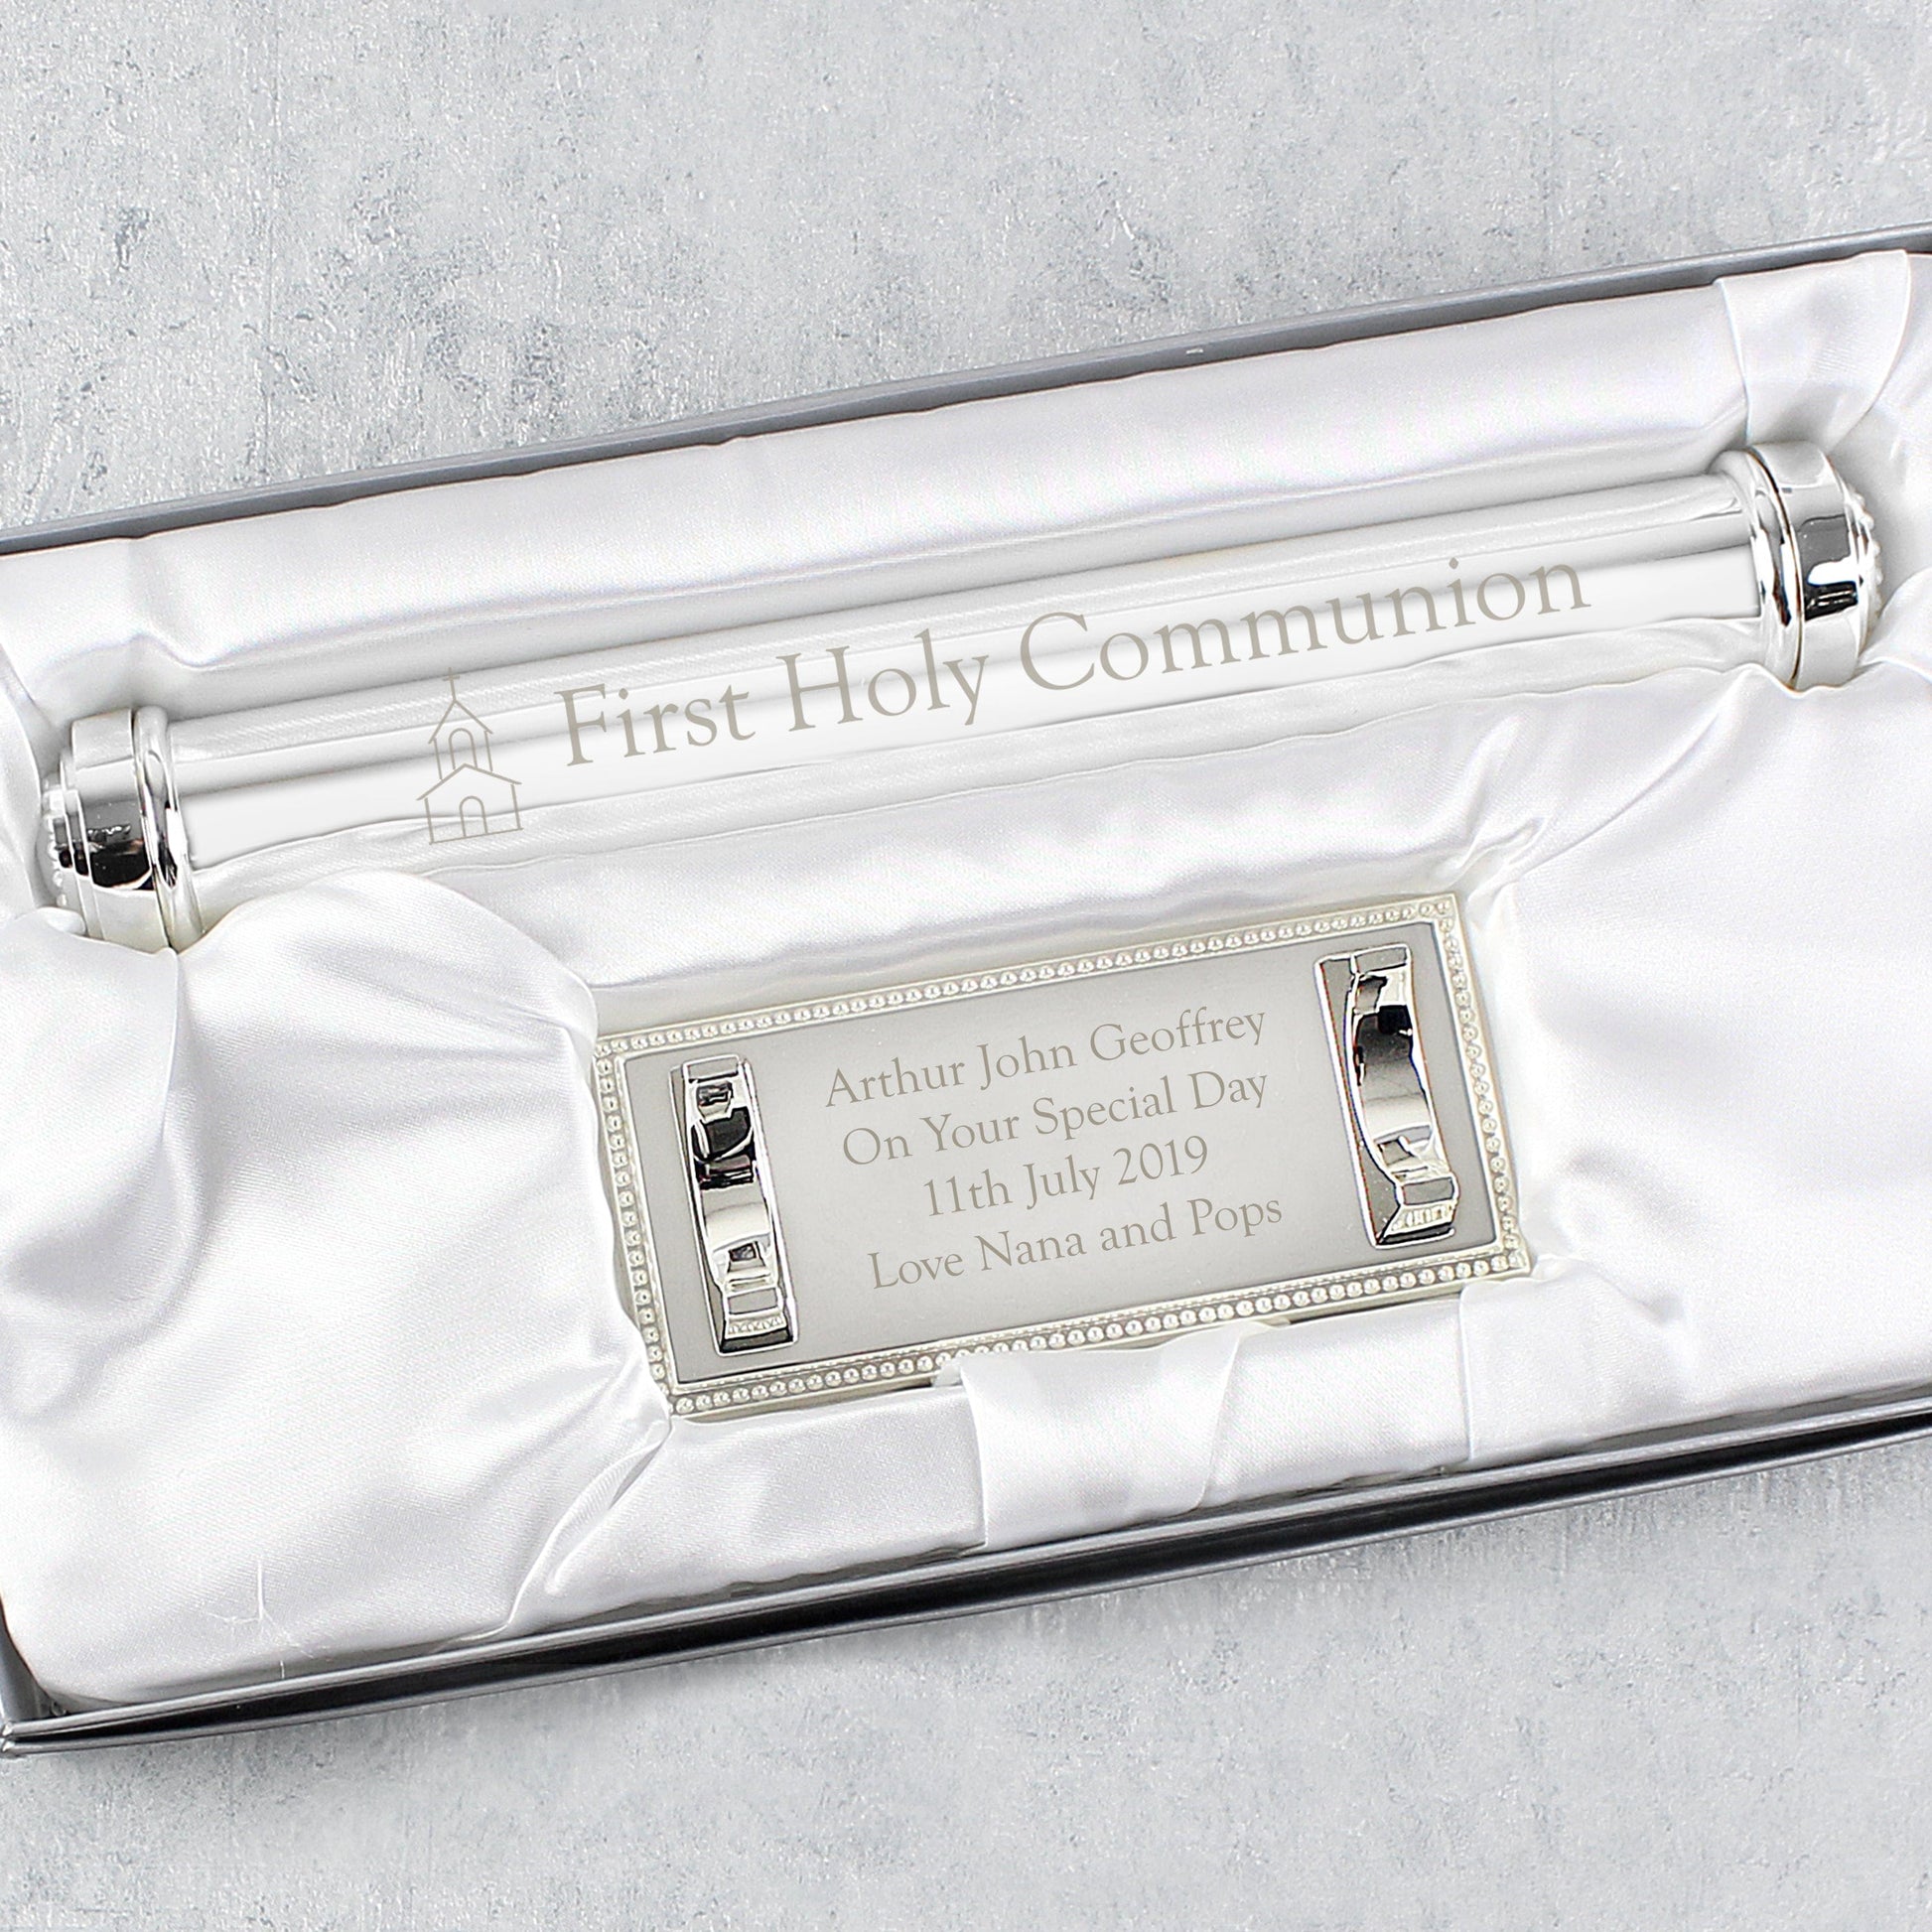 Personalised First Holy Communion Silver Plated Certificate Holder - PCS Cufflinks & Gifts